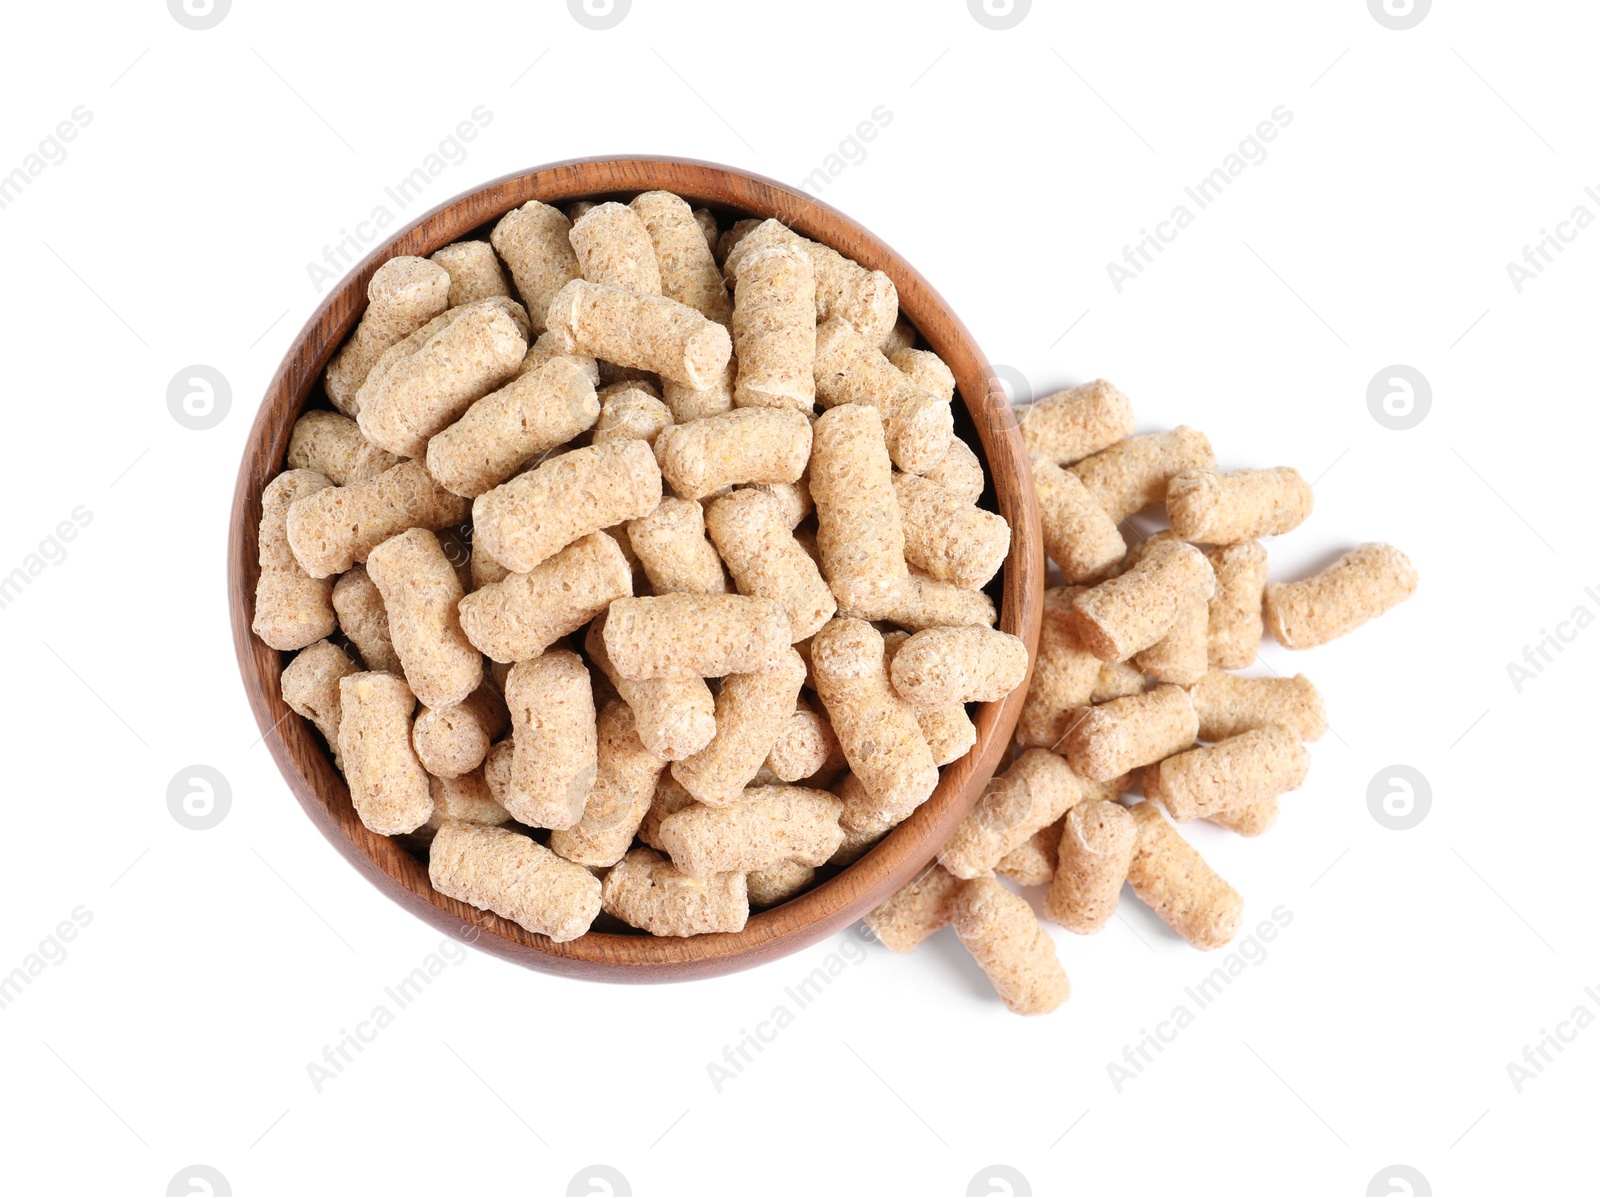 Photo of Granulated wheat bran in bowl on white background, top view